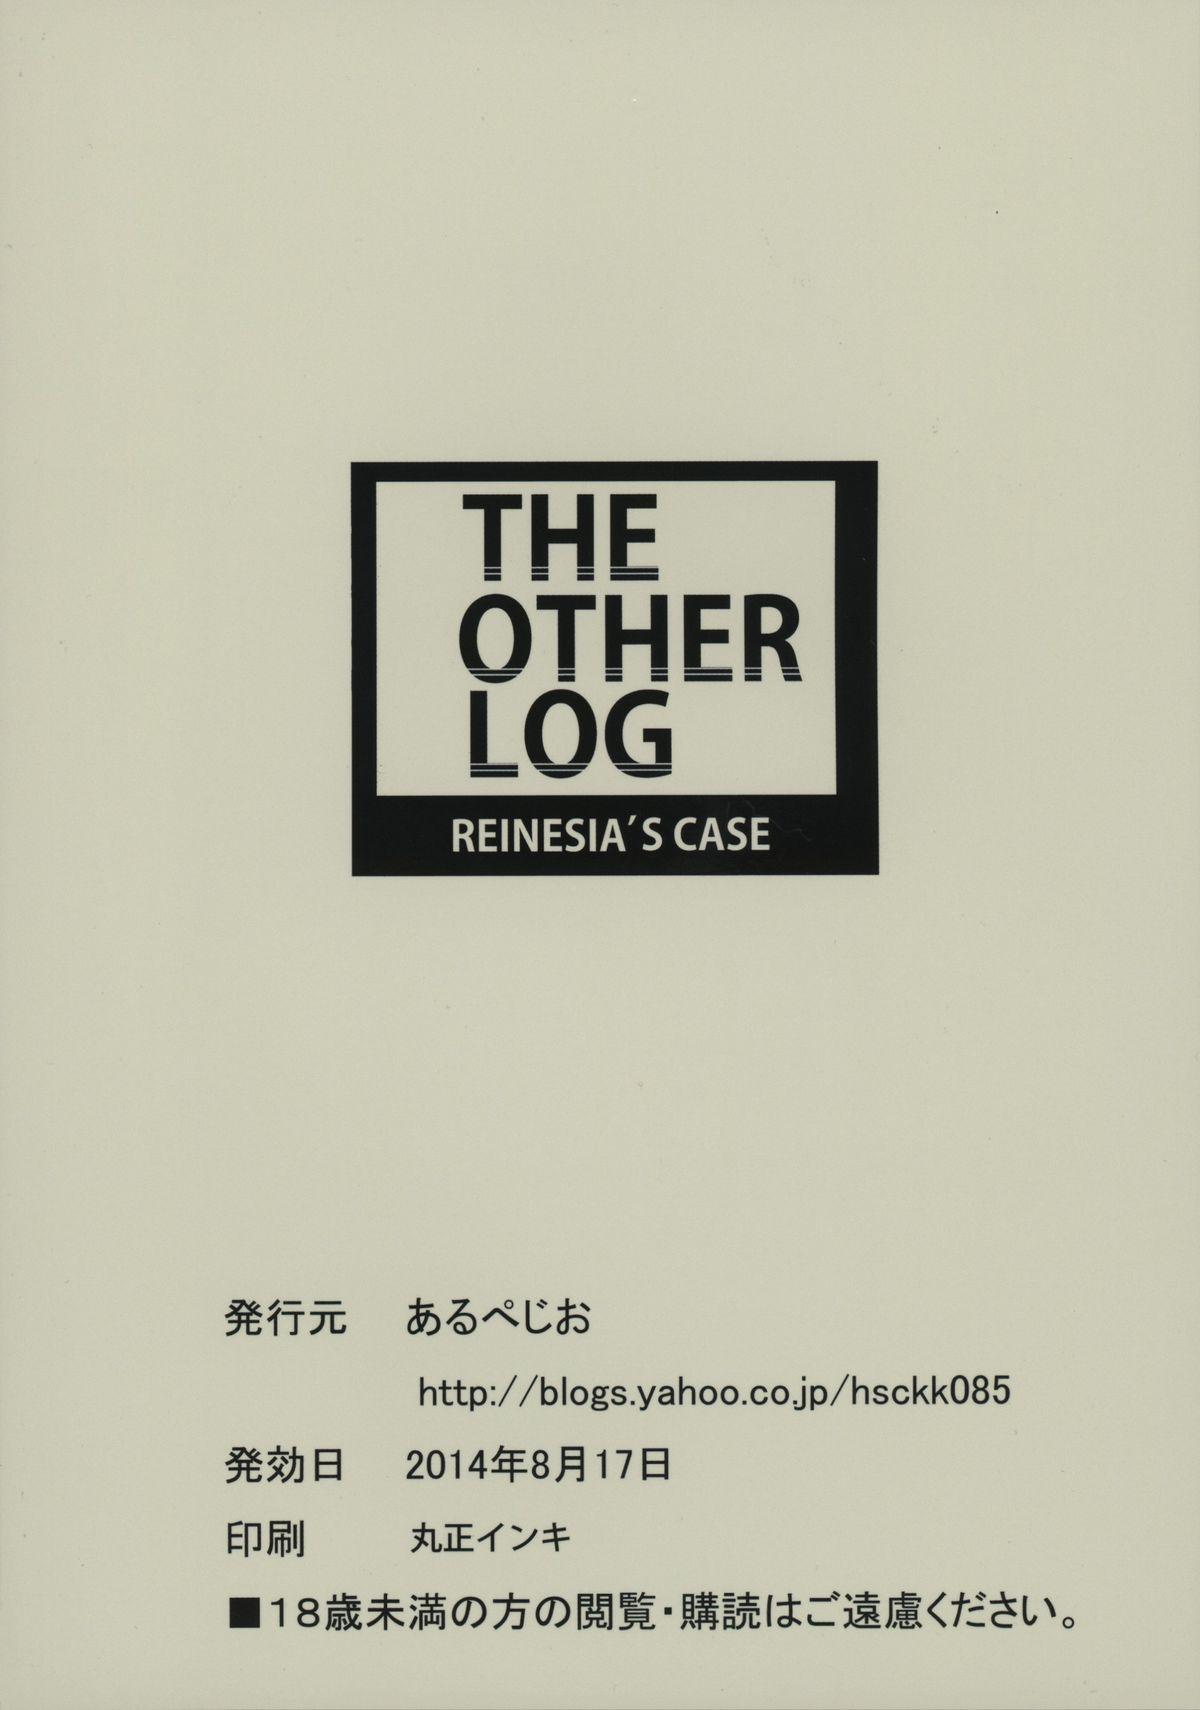 THE OTHER LOG REINESIA'S CASE 2